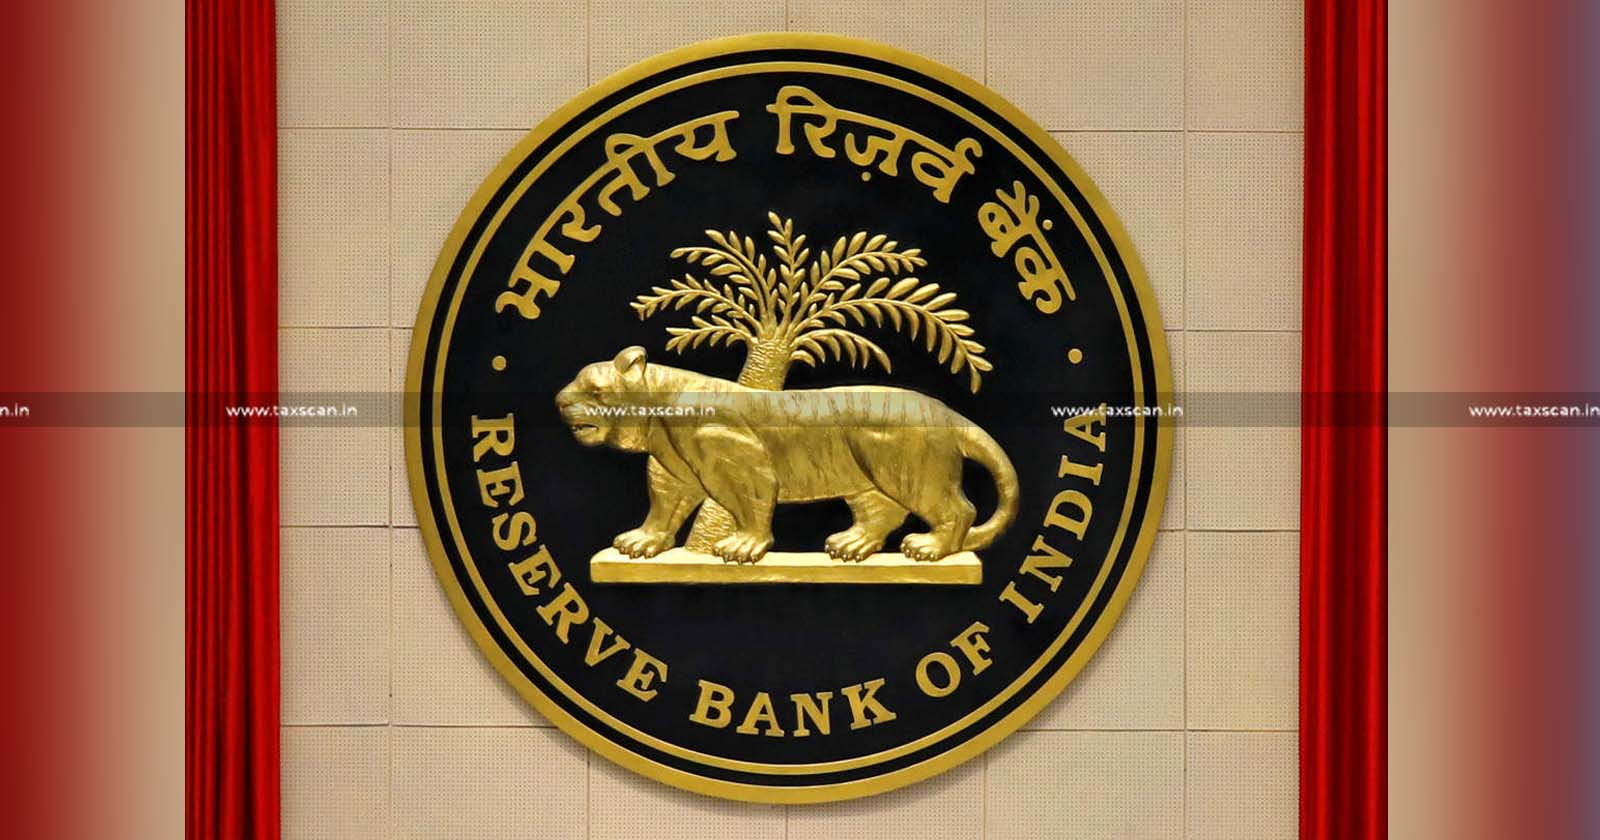 RBI - Reserve Bank Of India - RBI Liquidity Infusion to Banks - GST Advance Tax Impact on Banks - Advance Tax Collection and Banking Liquidity - Taxscan